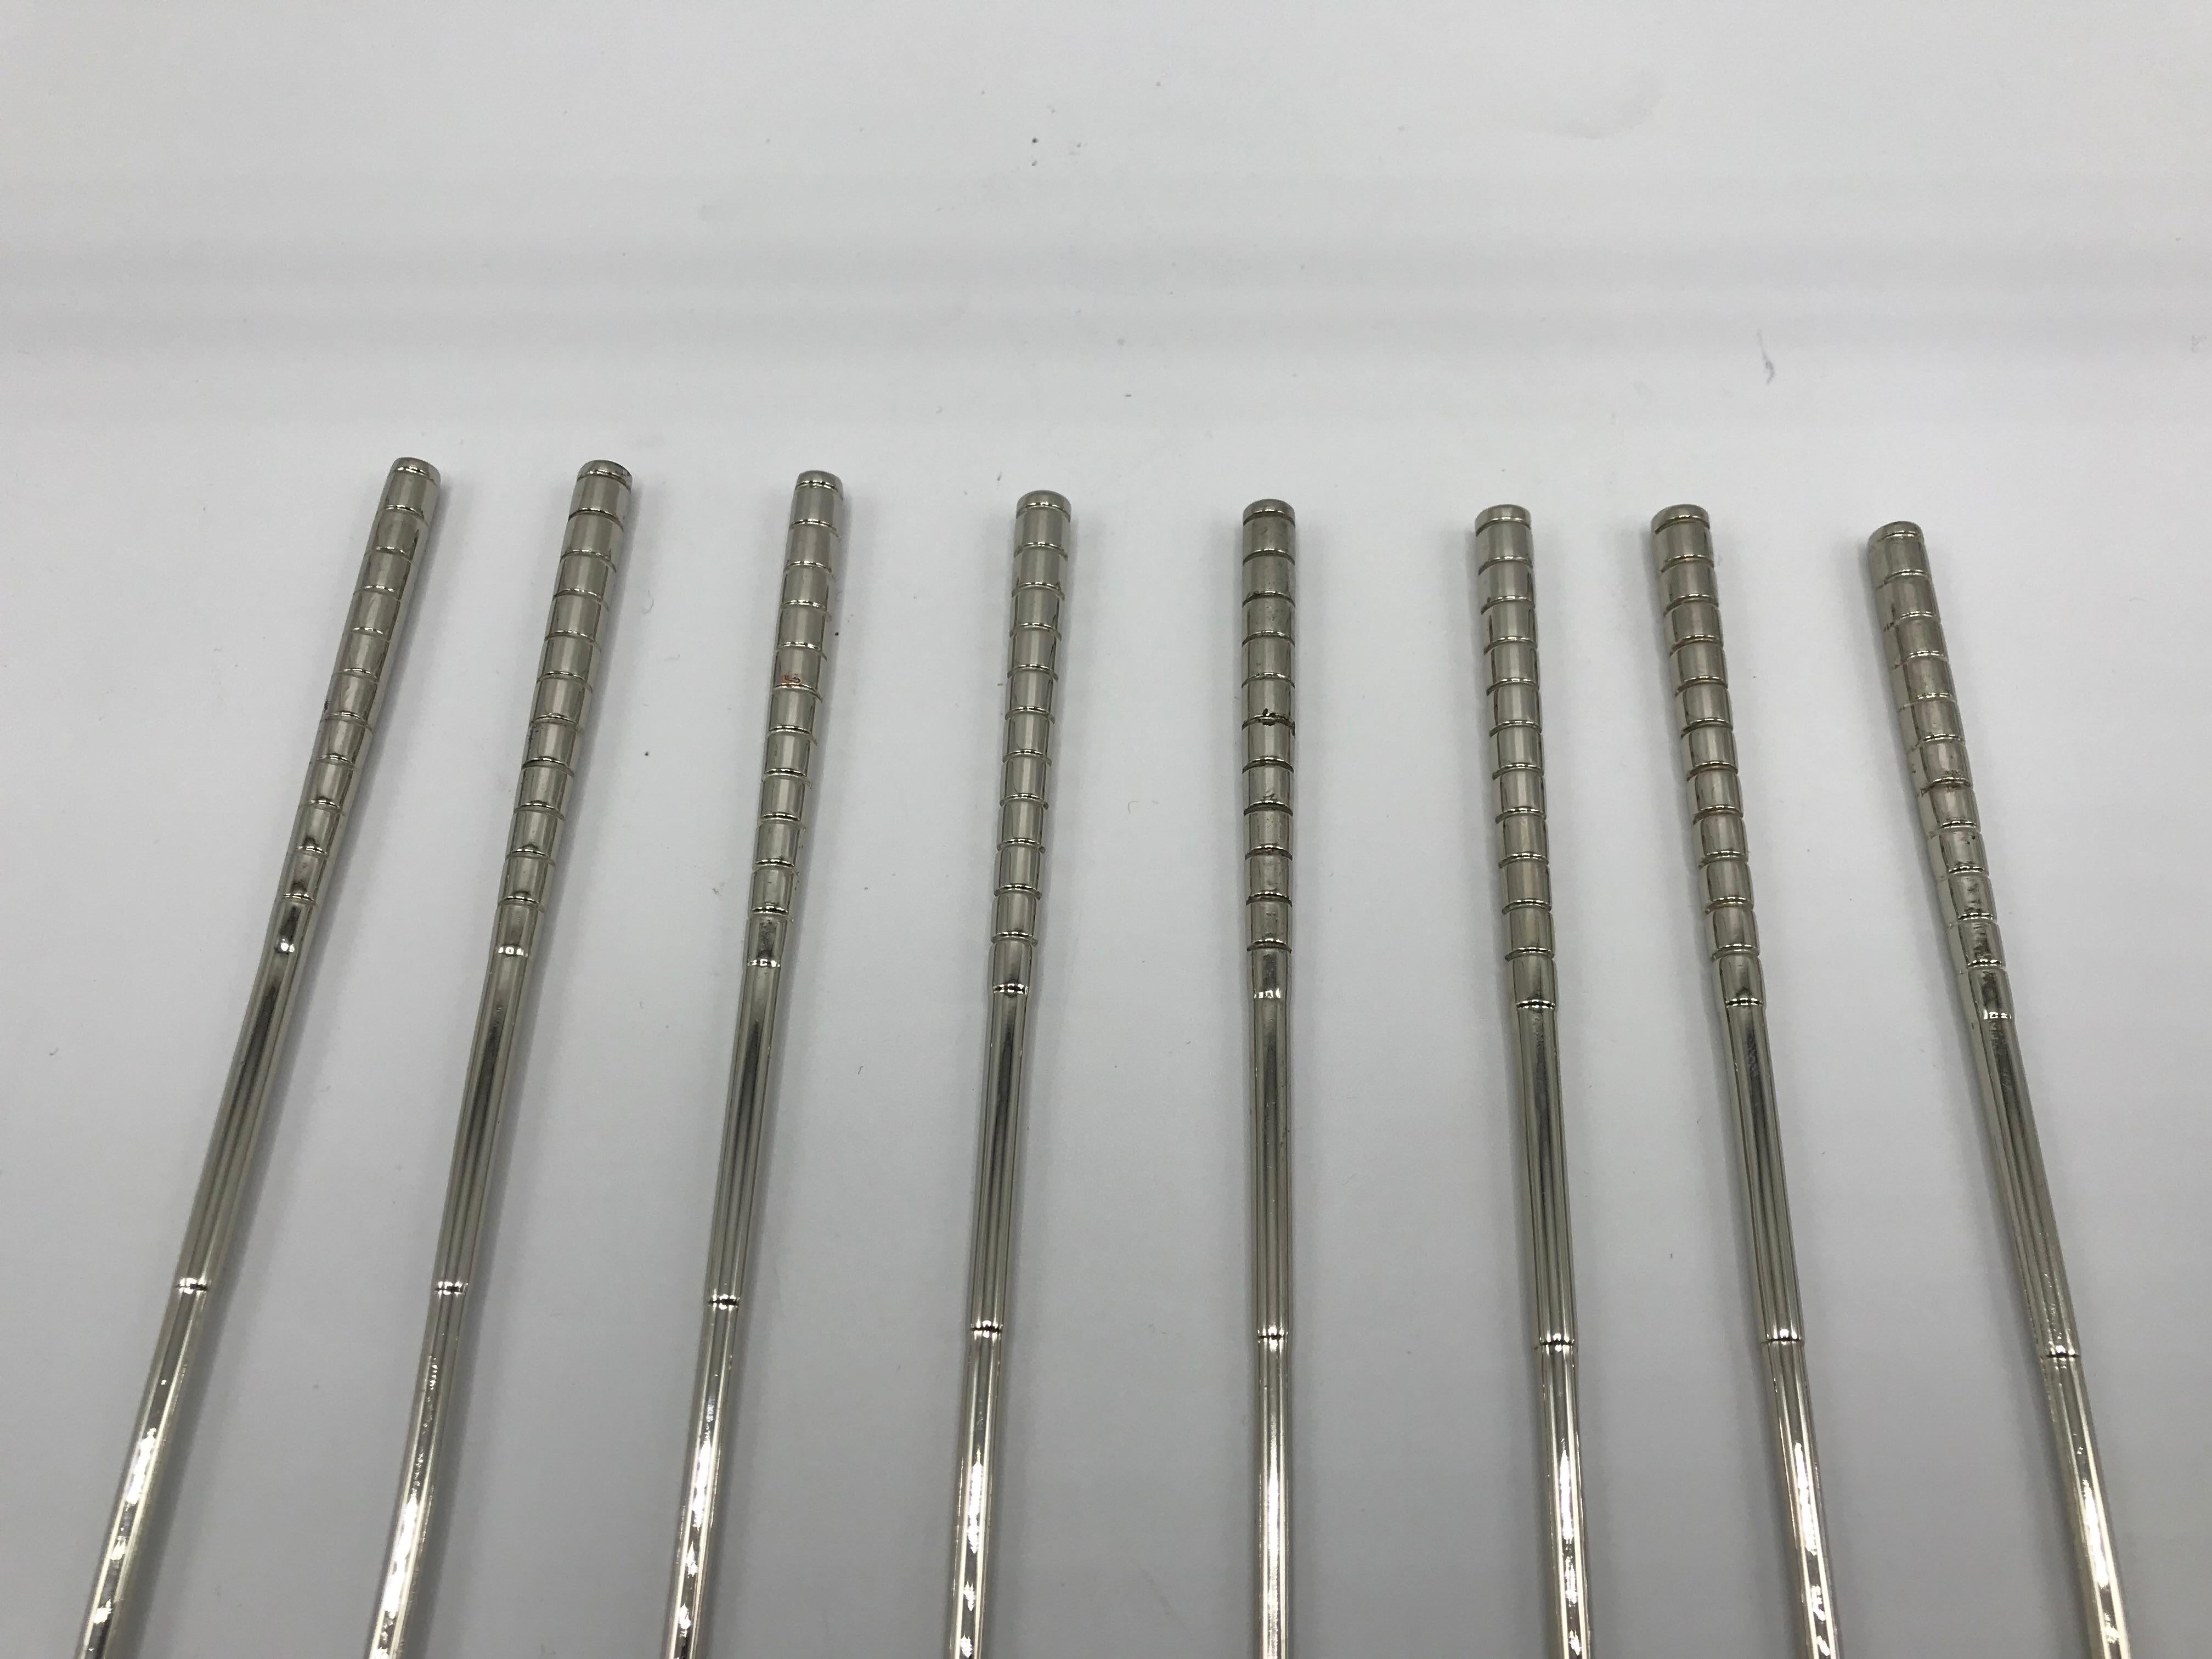 Offered is a fabulous, set of eight, 1960s silver plate golf club shaped cocktail stir-sticks. The set are perfect for any golf enthusiast or country-club inspired bar. Fairly heavy, considering their size.